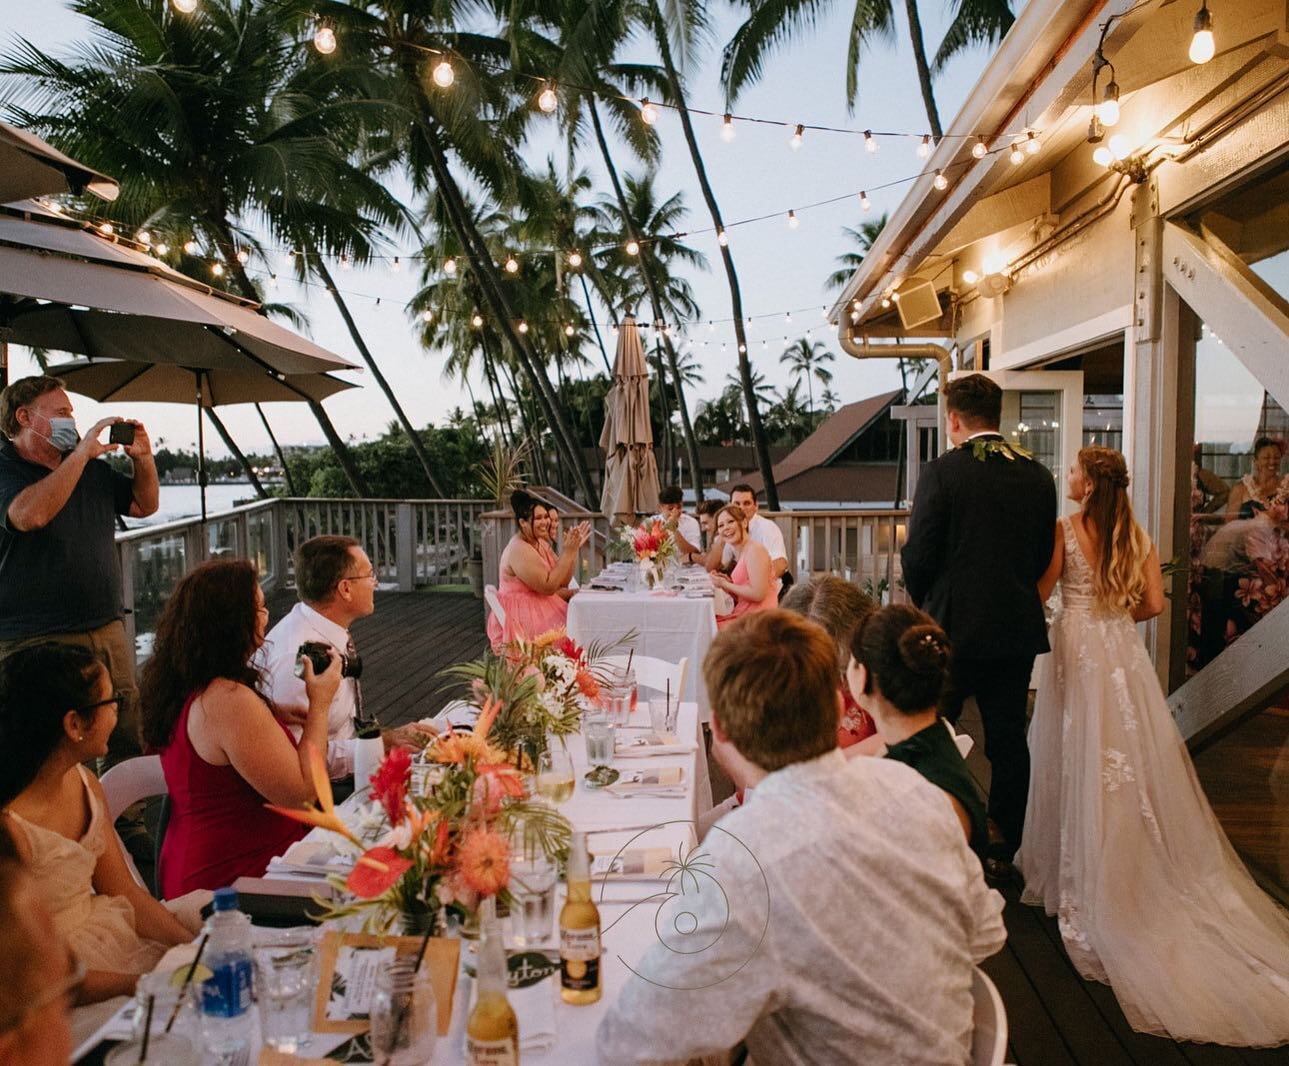 Not sure what tasks to take care of while planning your wedding? 

Papa Kona Events to the rescue! We have a wonderful planning guide that we share with you once you book your wedding with us. 

The planning guide breaks down wedding tasks month by m